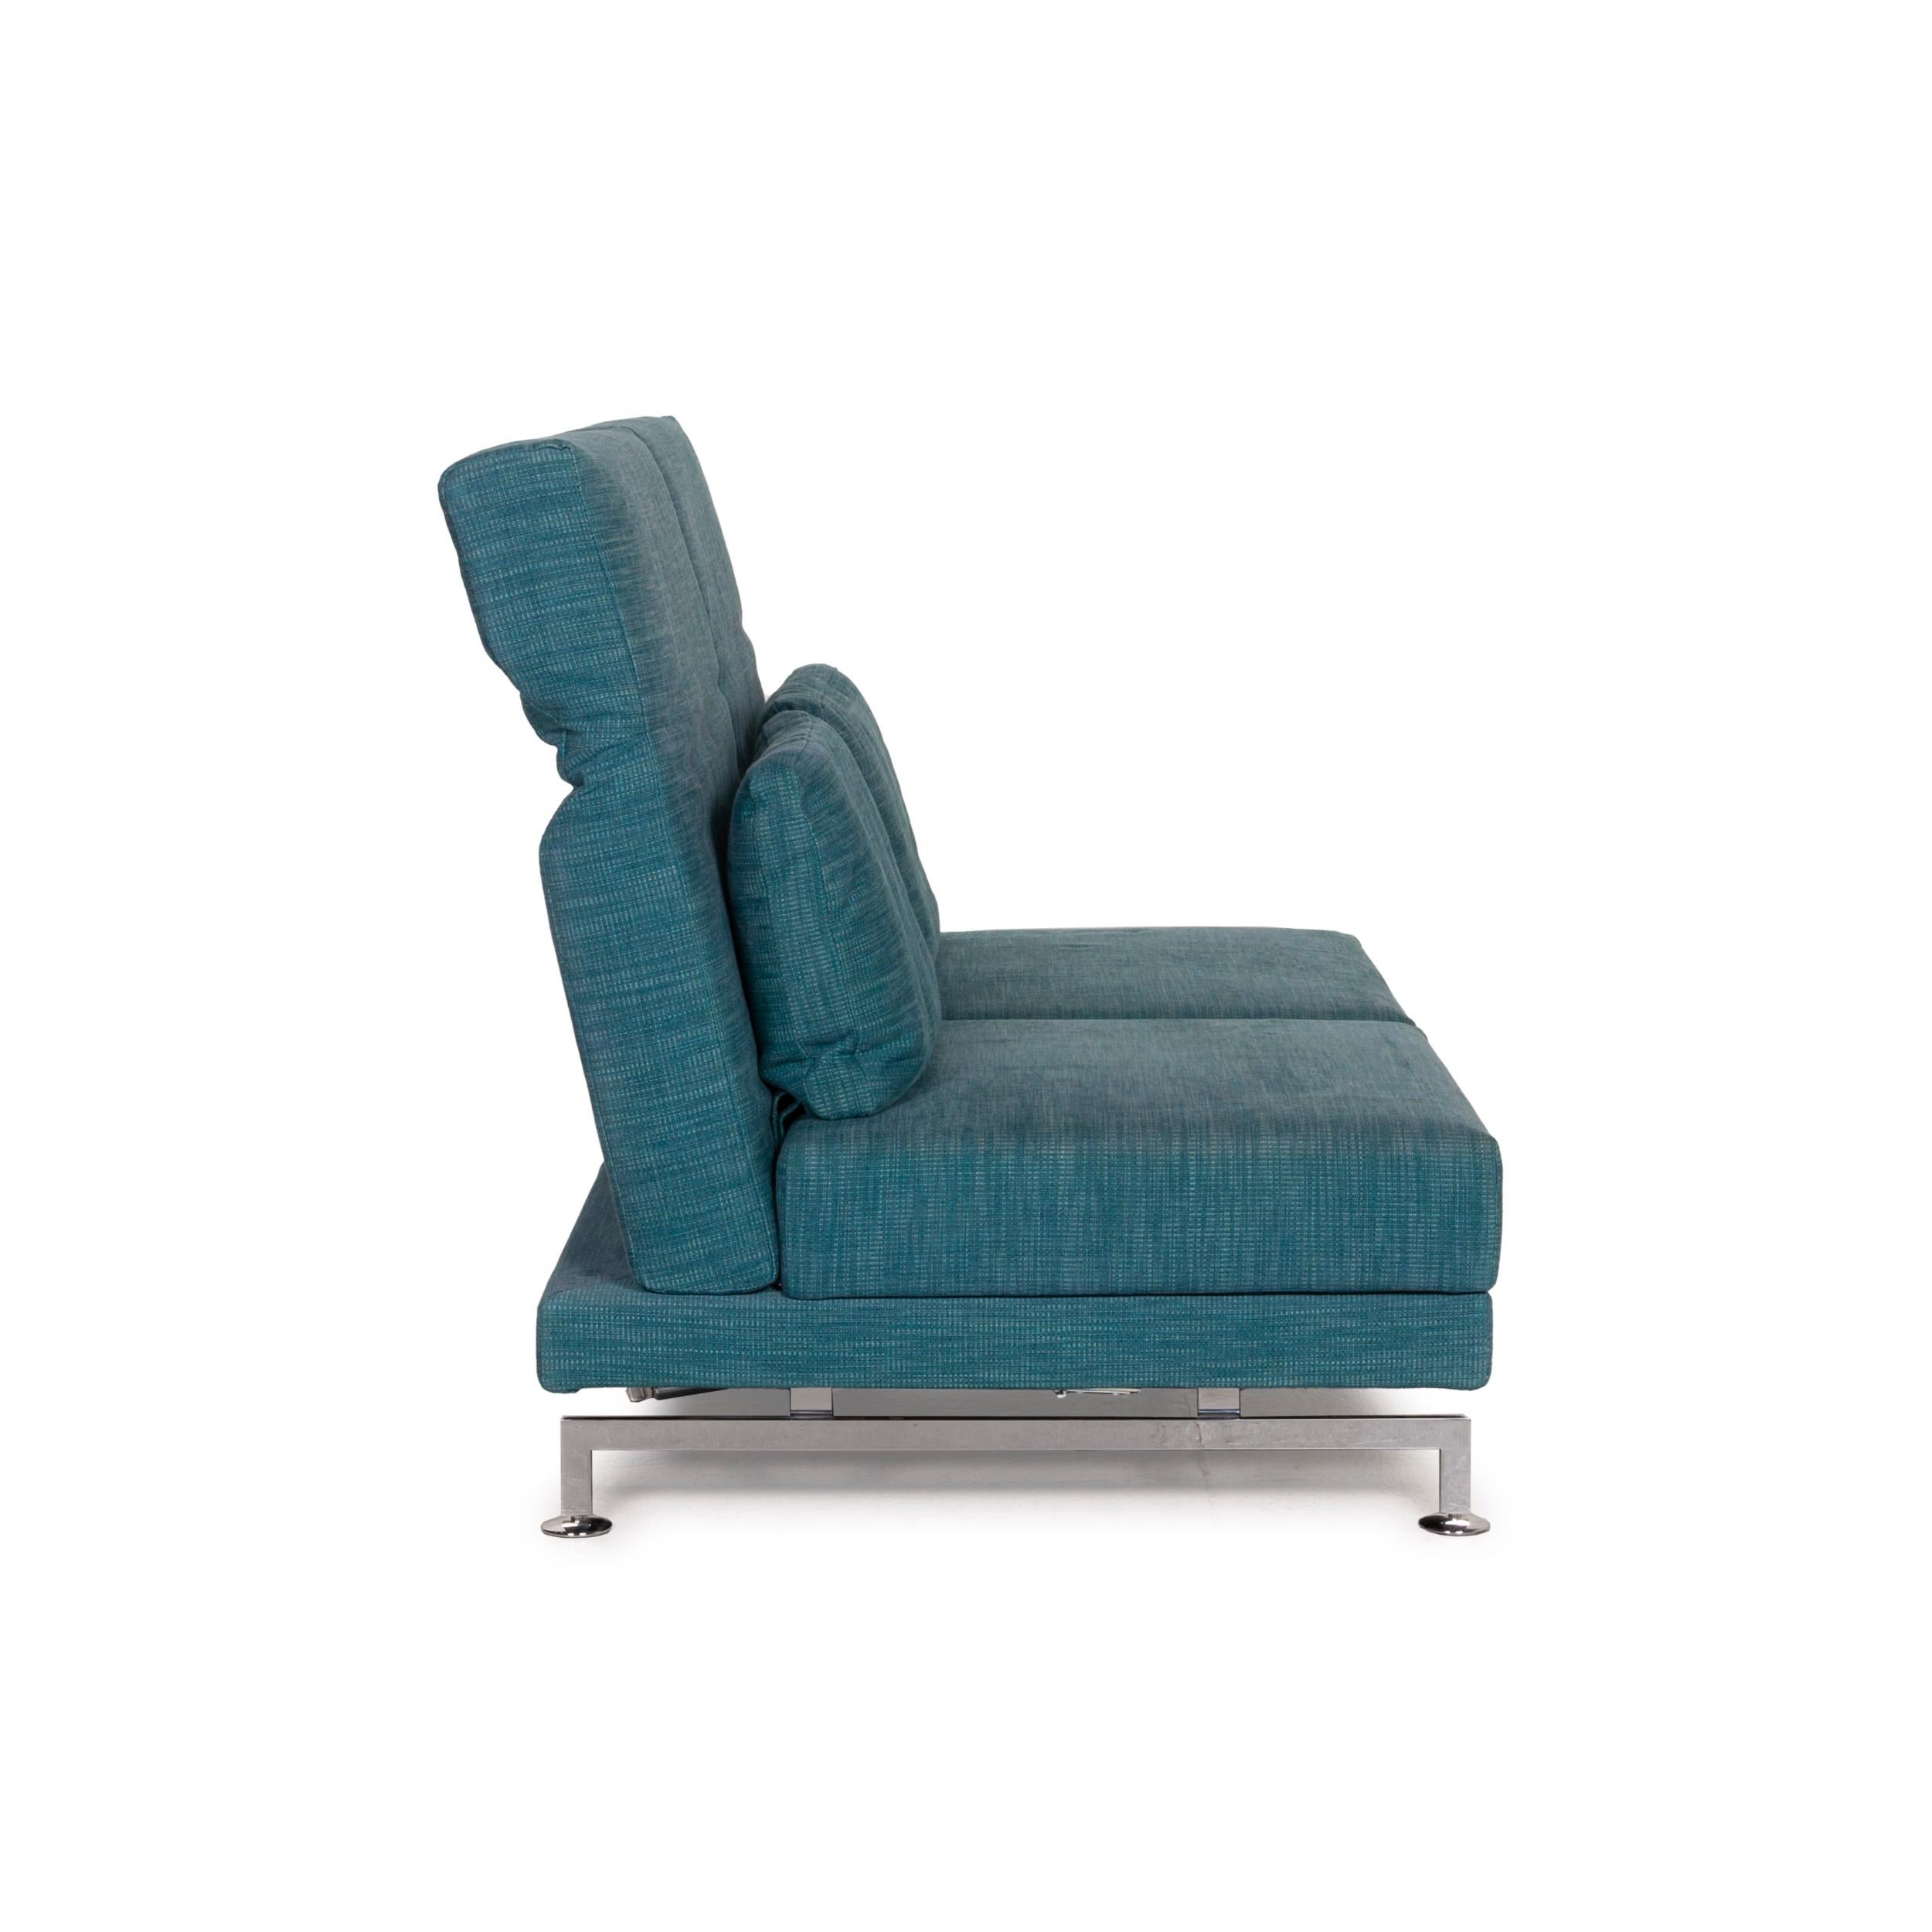 Brühl & Sippold Moule Fabric Sofa Blue Two-Seater Reclining Function Turquoise For Sale 4